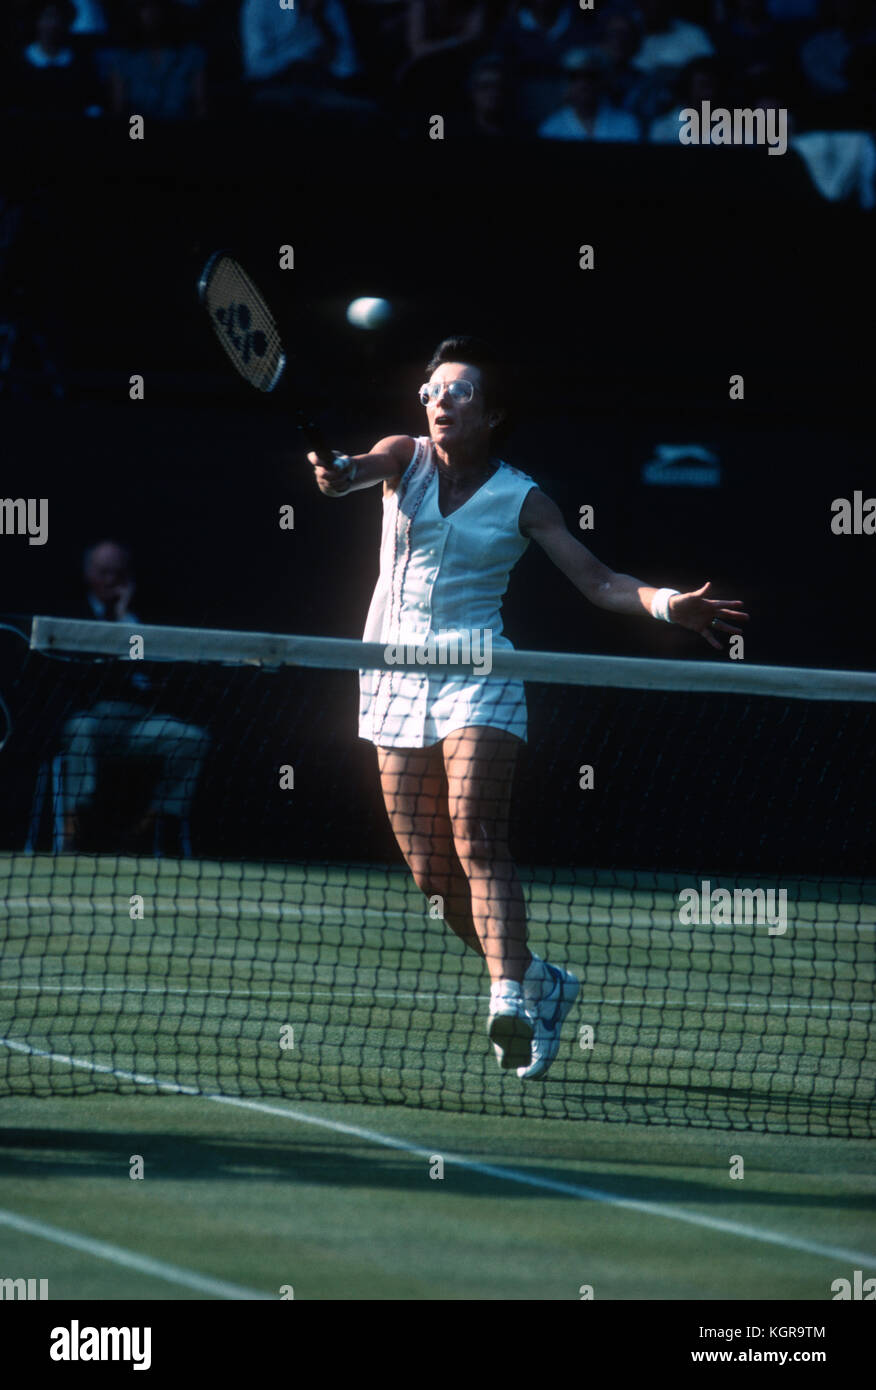 Billie Jean King reaching for a volley at Wimbledon, 1983 Stock Photo